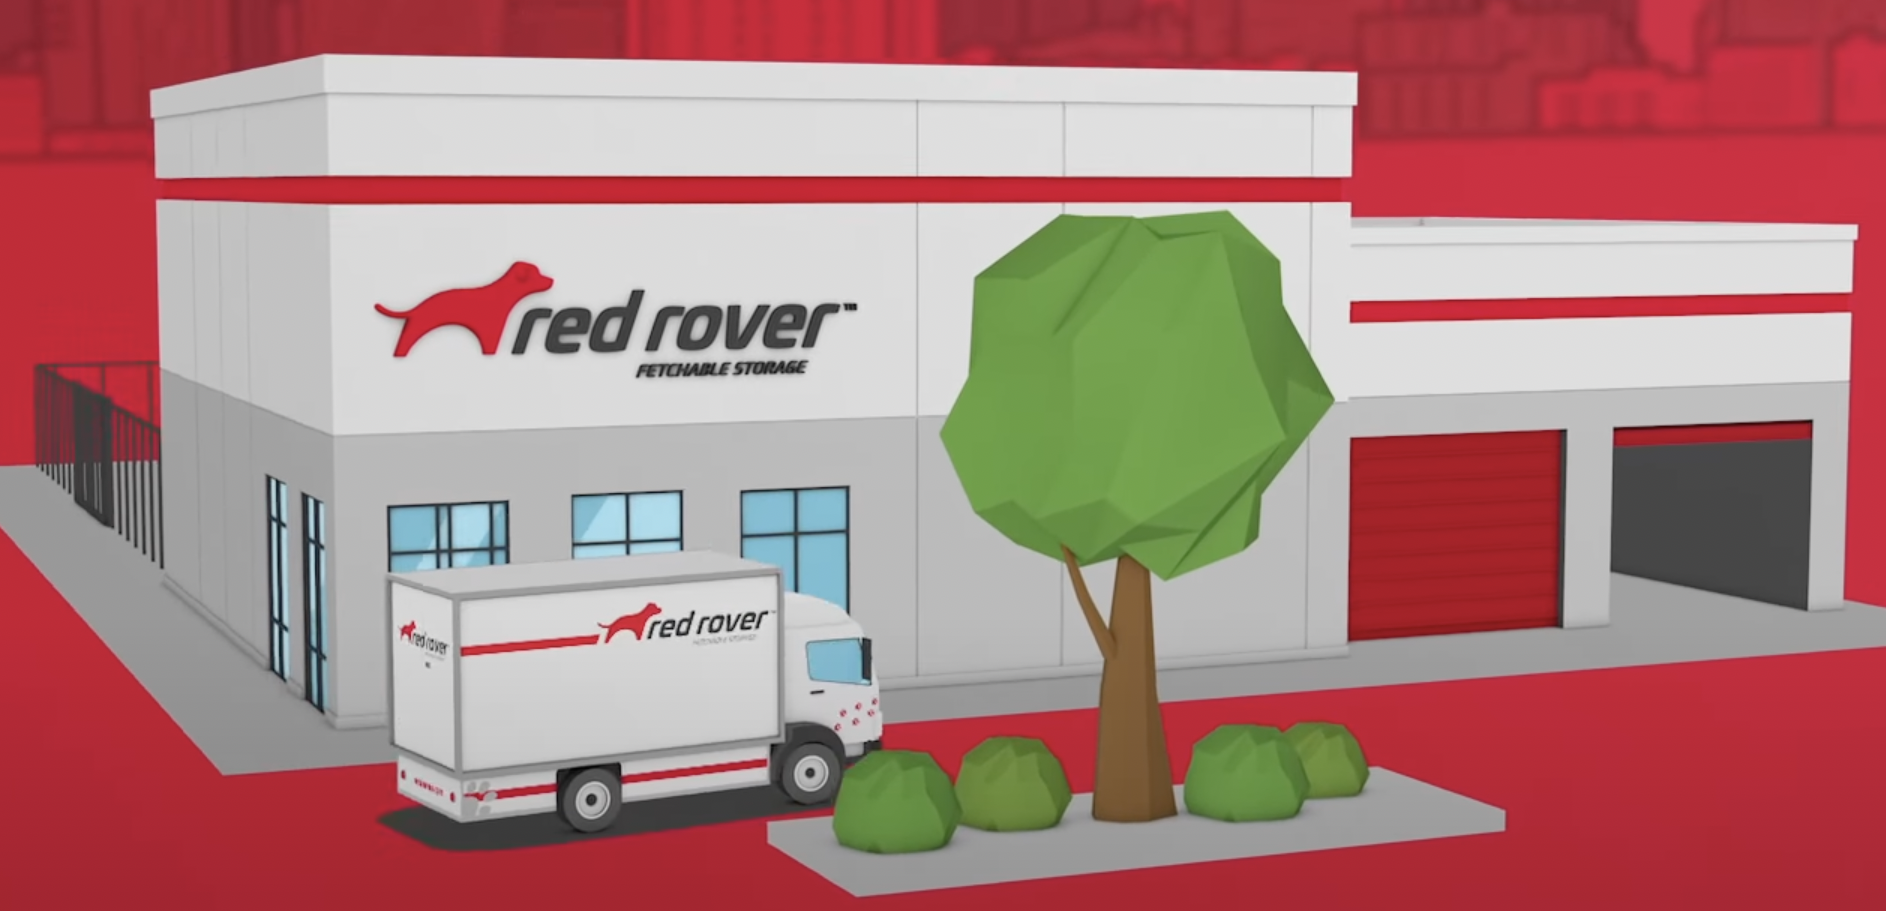 Since launching in February 2020, Red Rover has quickly expanded to Massachusetts, New York, North Carolina and Texas. (Courtesy image)